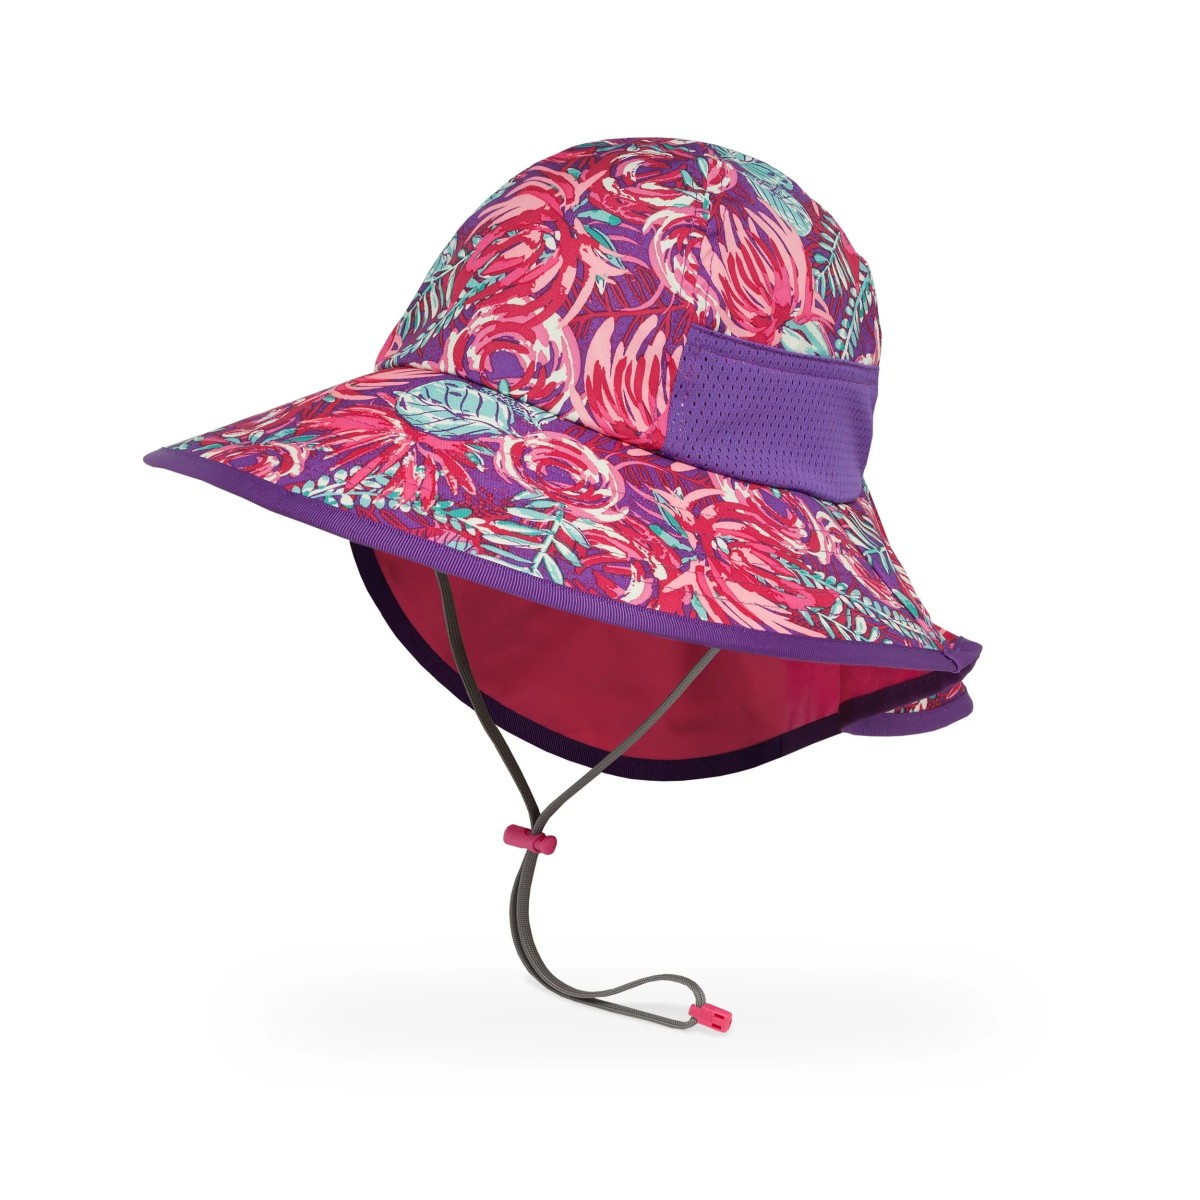 Sunday Afternoons Kids' Play Hat Review